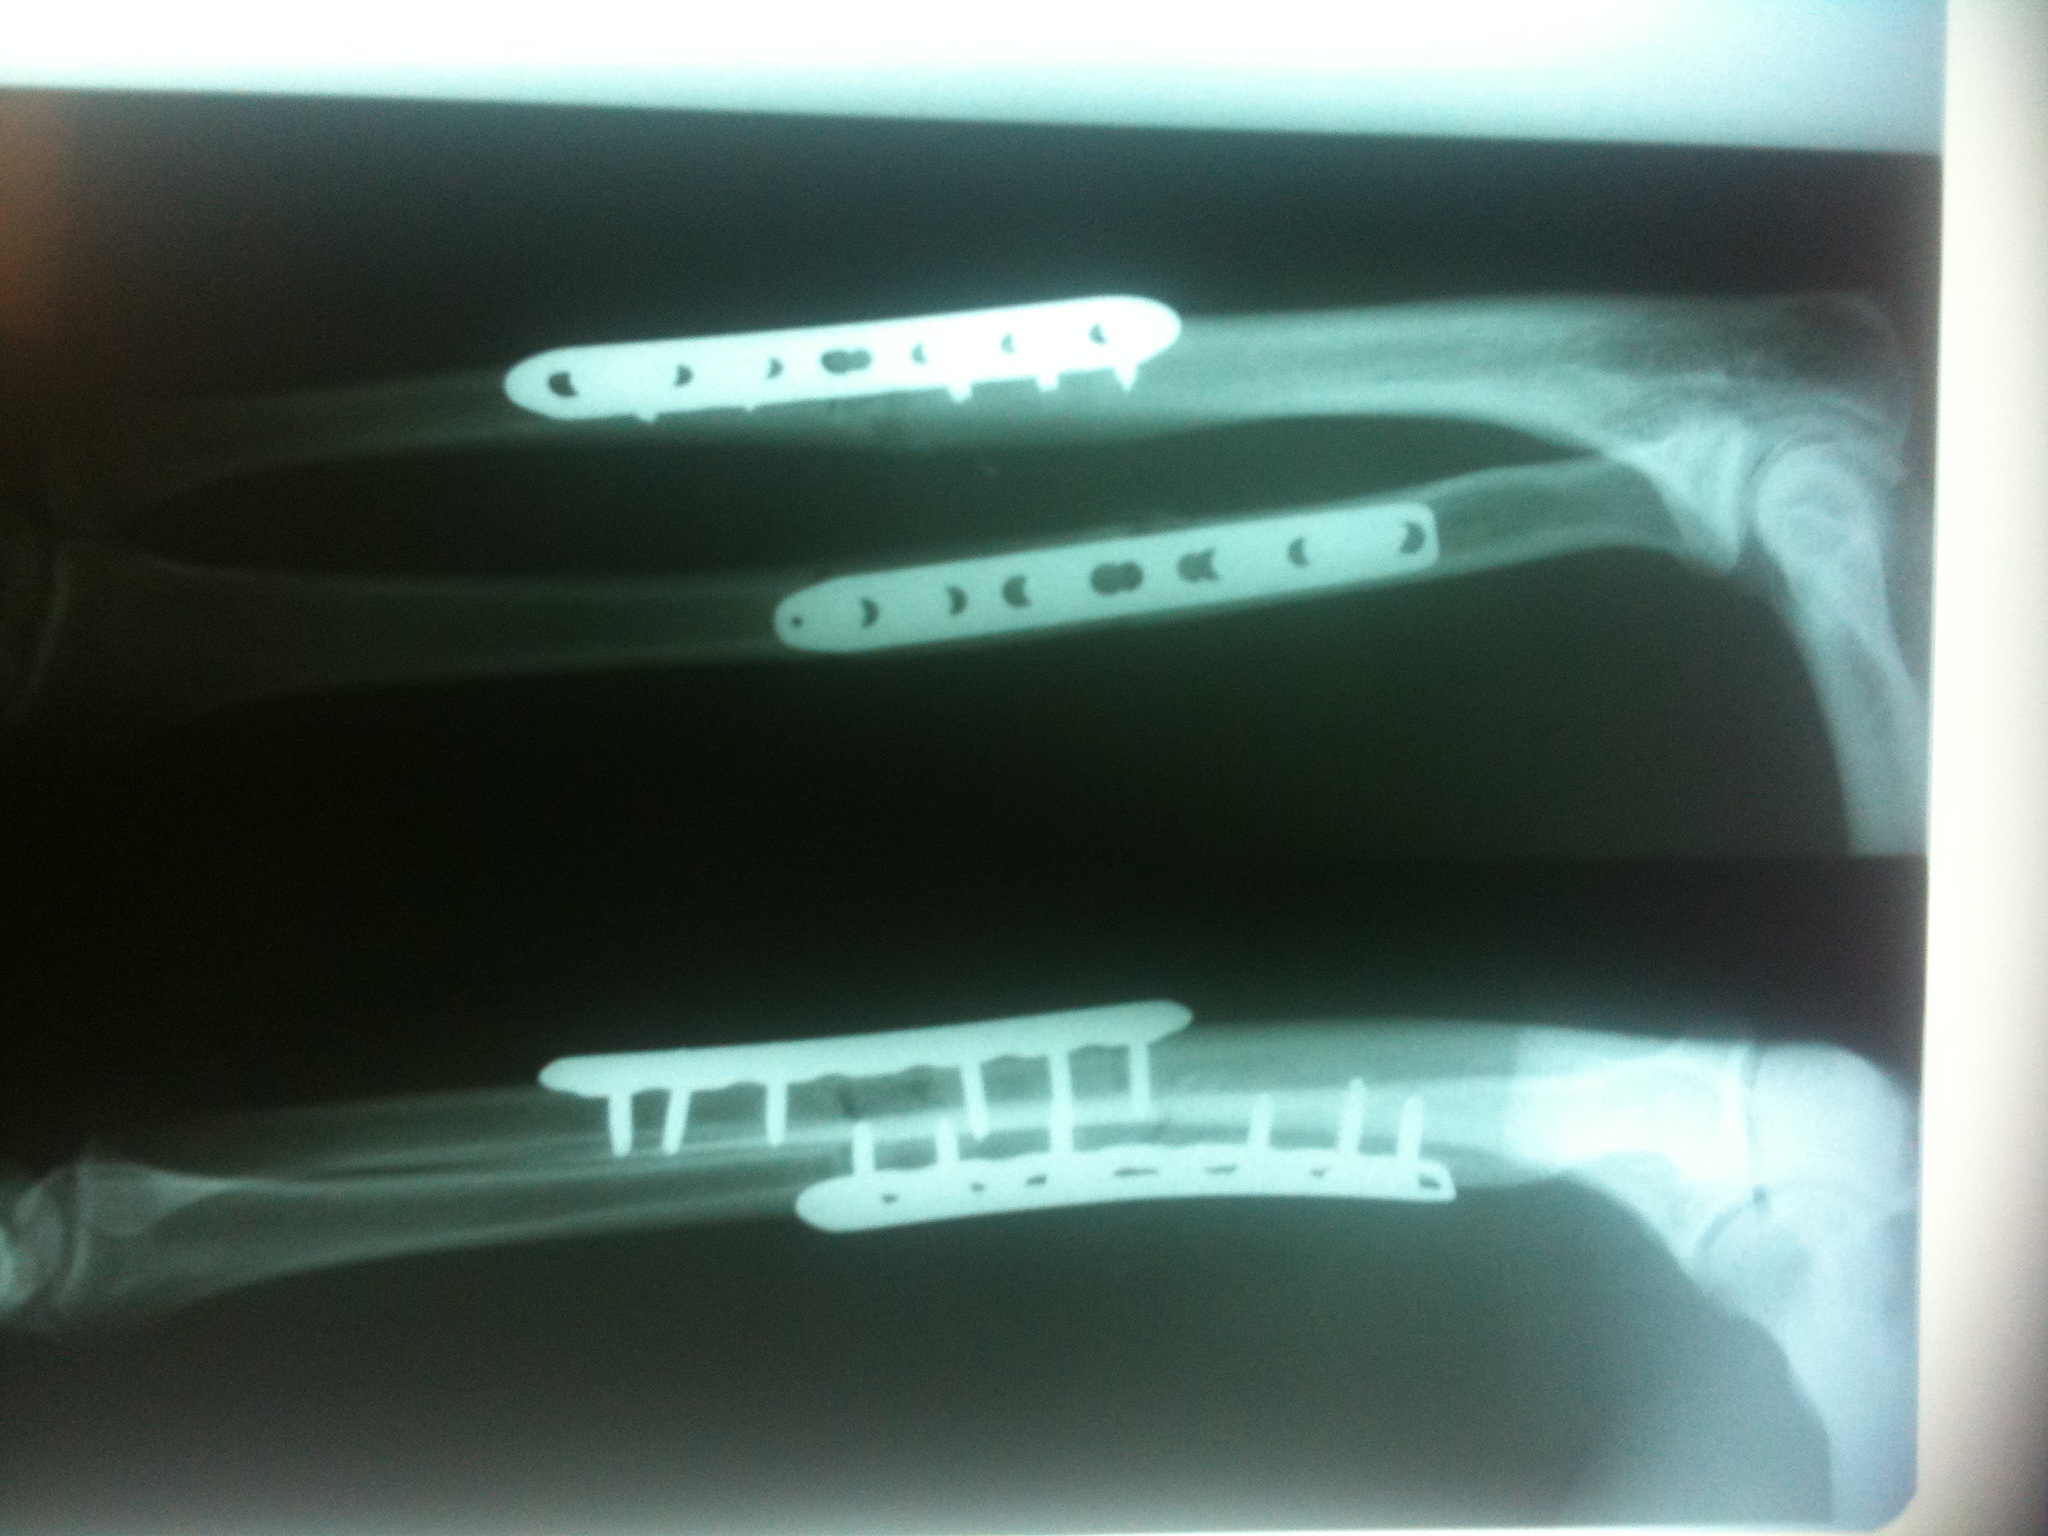 My boyfriend was struck, while walking,  by a motorcycle rider on a stolen bike going 80-100mph..broke both bones in forearm  needed metal plates with screws